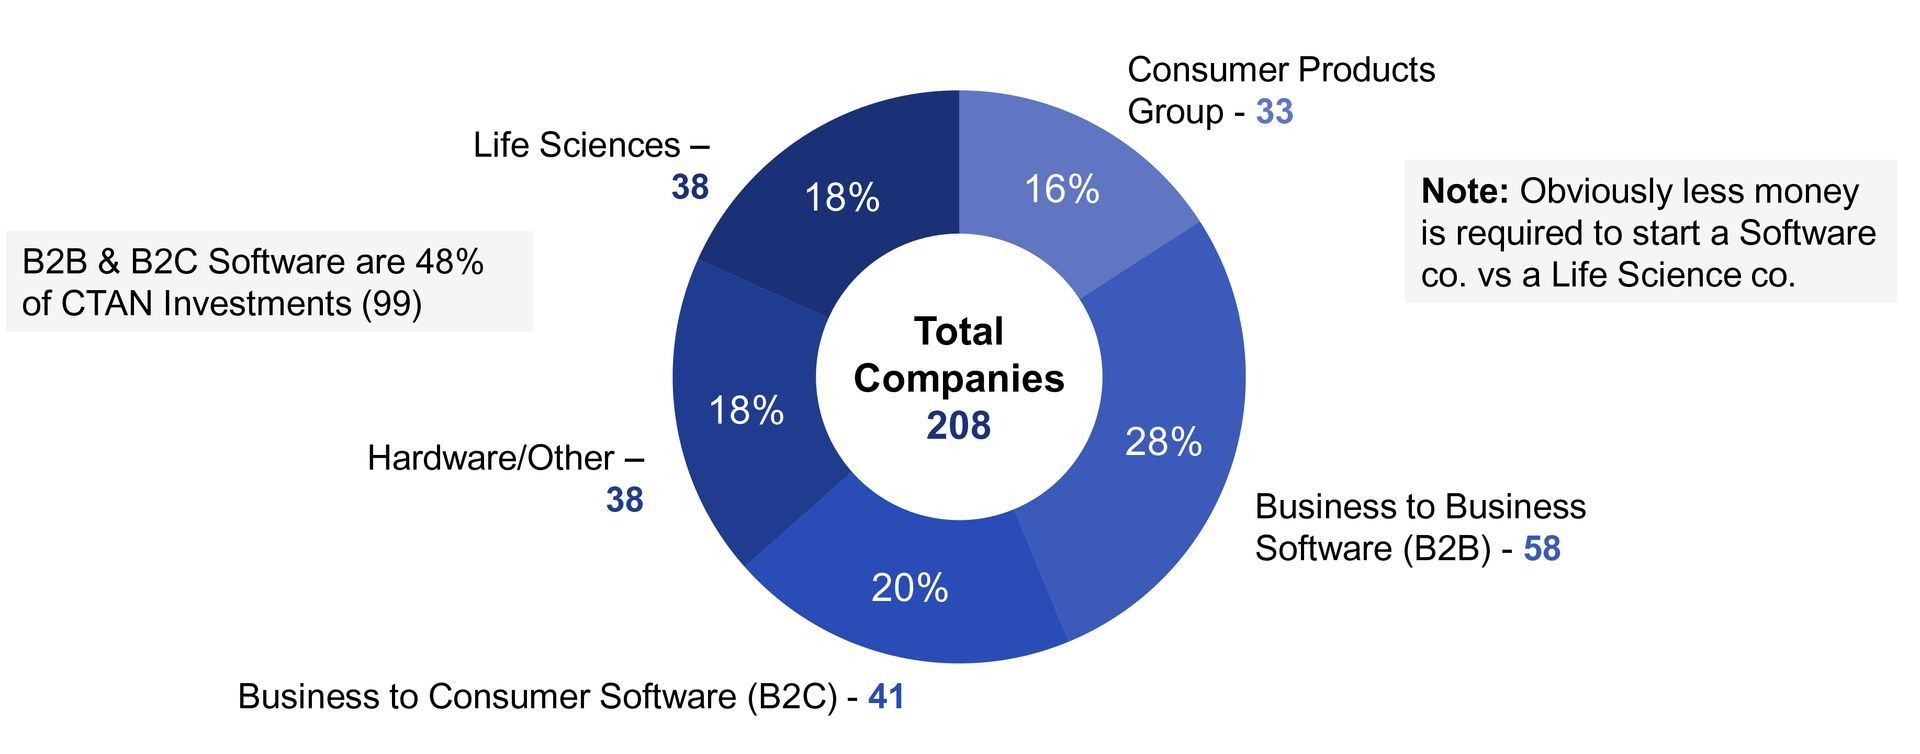 a pie chart showing the total companies in the world